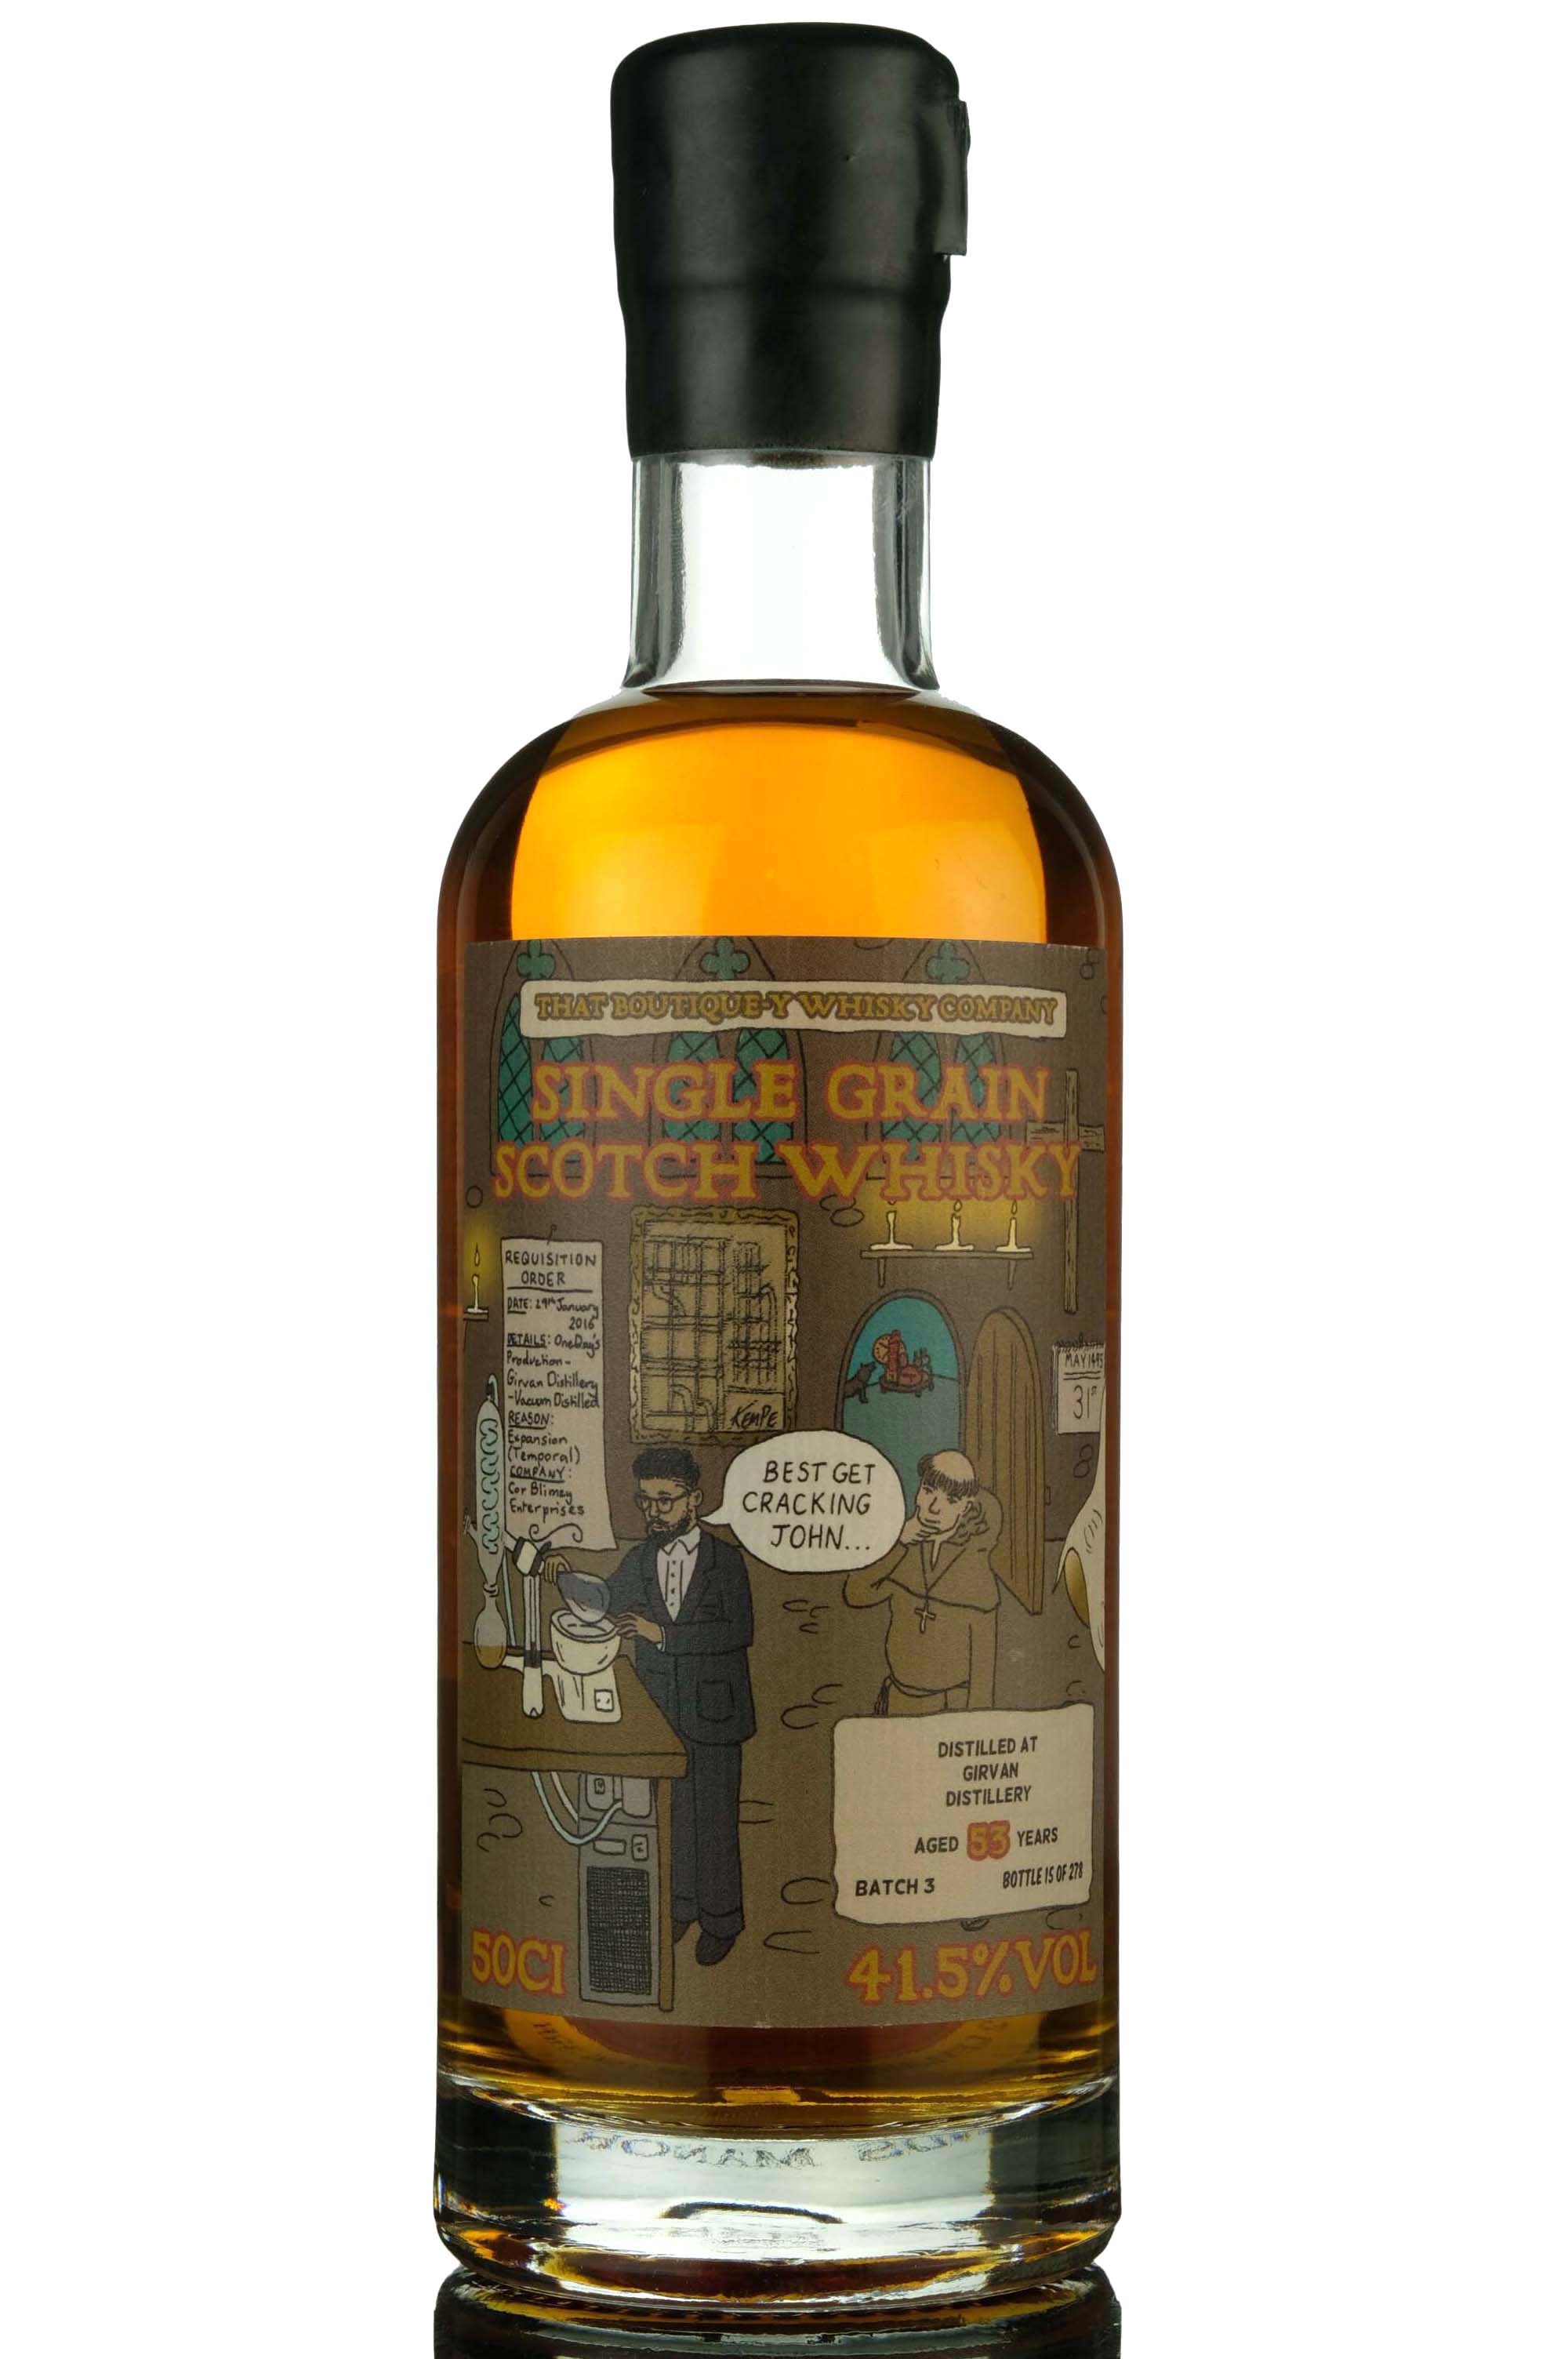 Girvan 53 Year Old - That Boutique-y Whisky Company - Batch 3 - 2017 Release